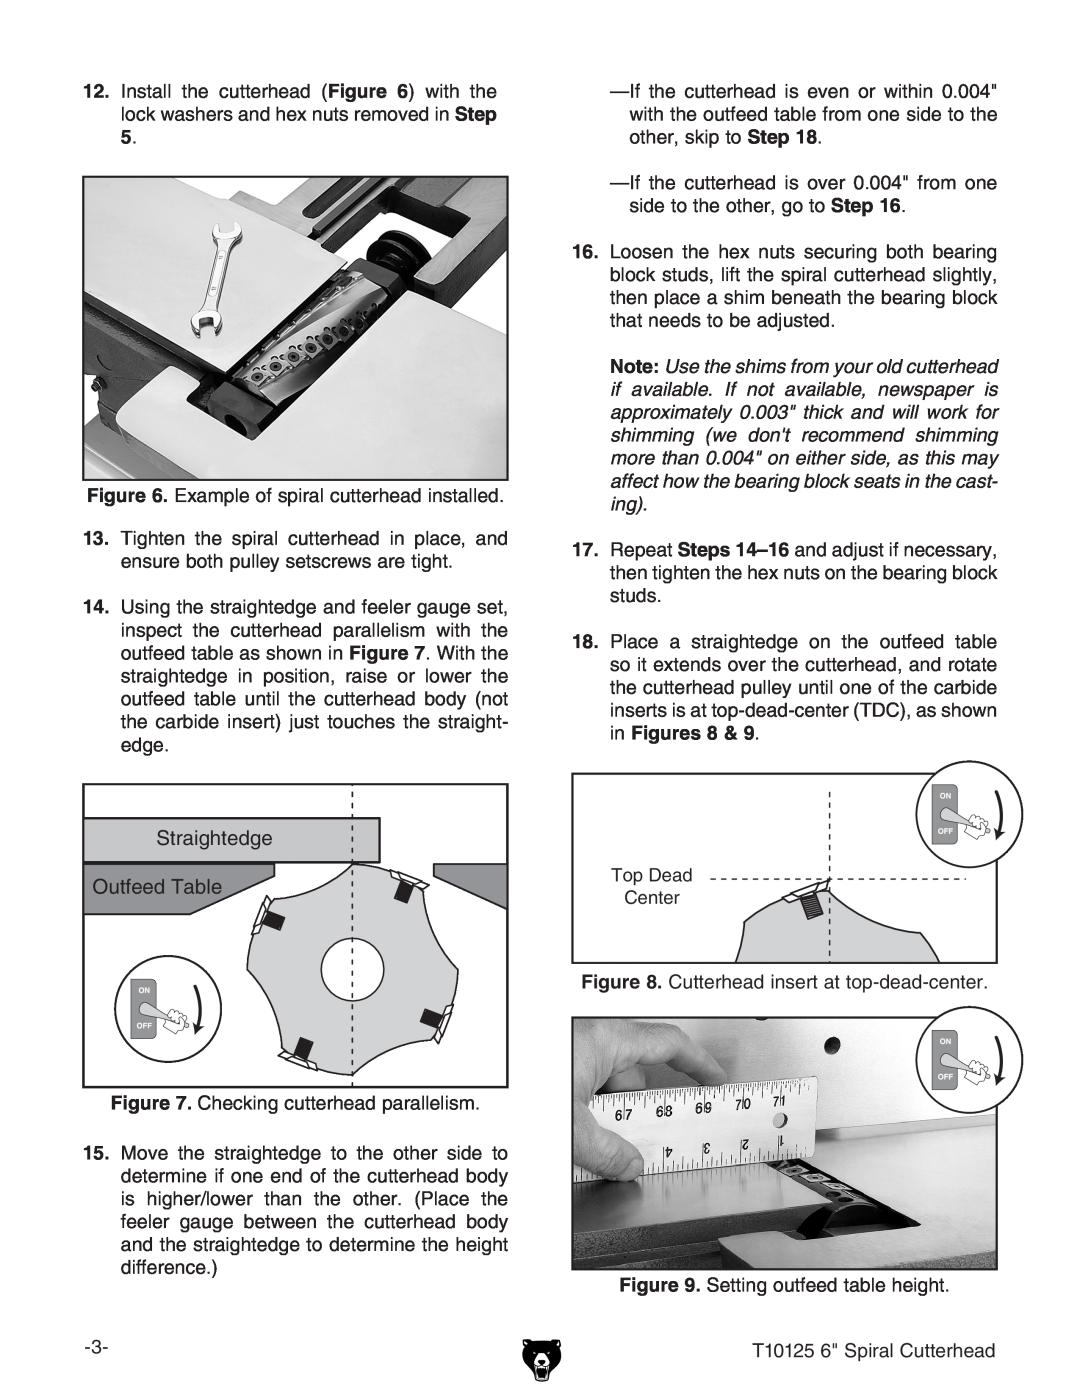 Grizzly T10125 manual Example of spiral cutterhead installed 